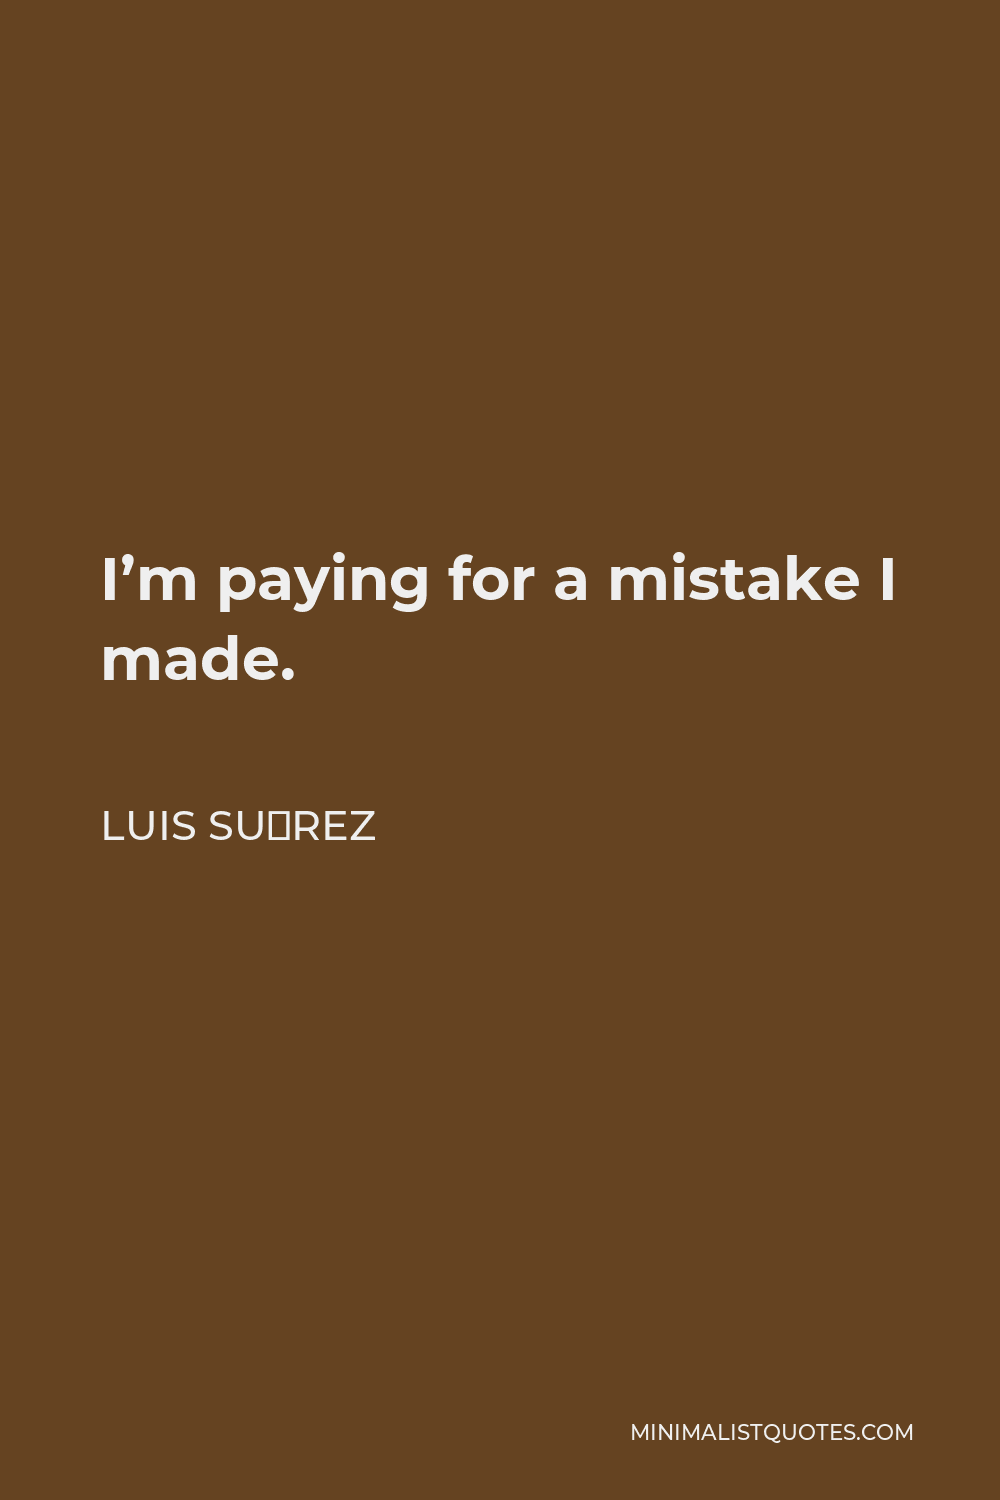 Luis Suárez Quote - I’m paying for a mistake I made.